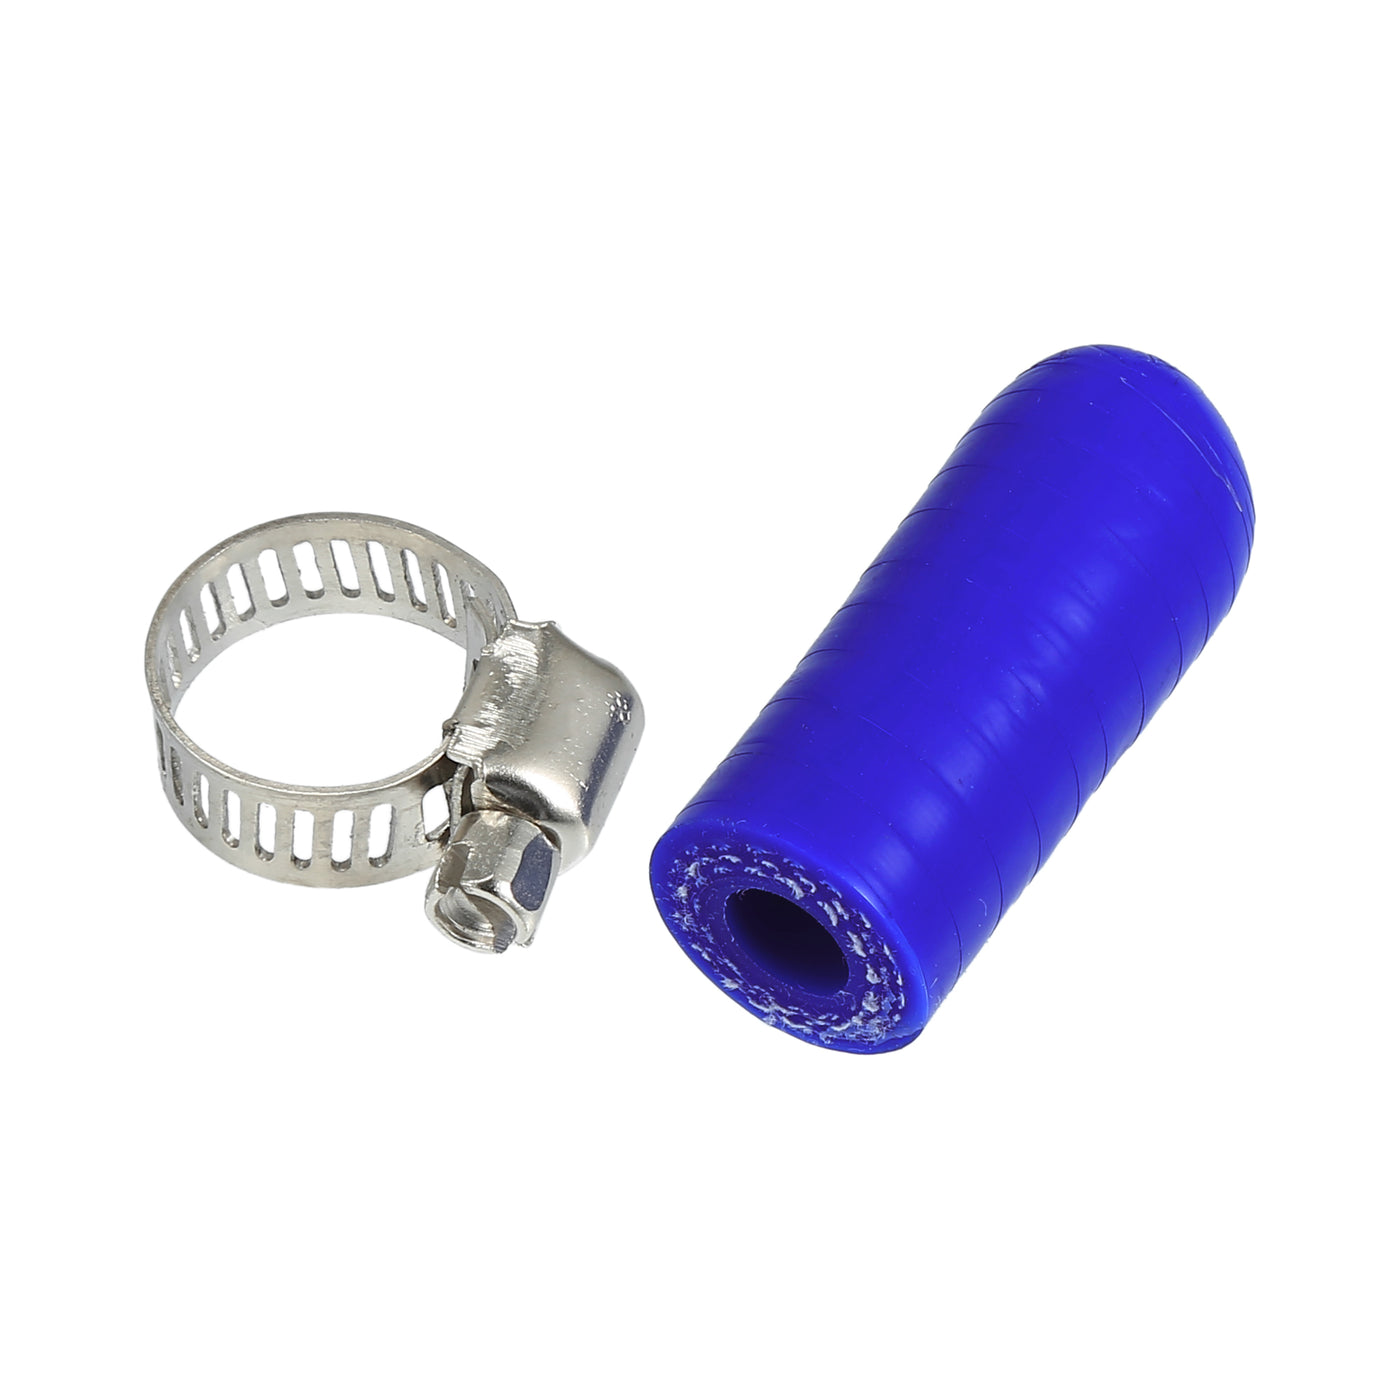 X AUTOHAUX 1 Set 30mm Length 8mm/0.31" ID Blue Car Silicone Rubber Hose End Cap with Clamps Silicone Reinforced Blanking Cap for Bypass Tube Universal